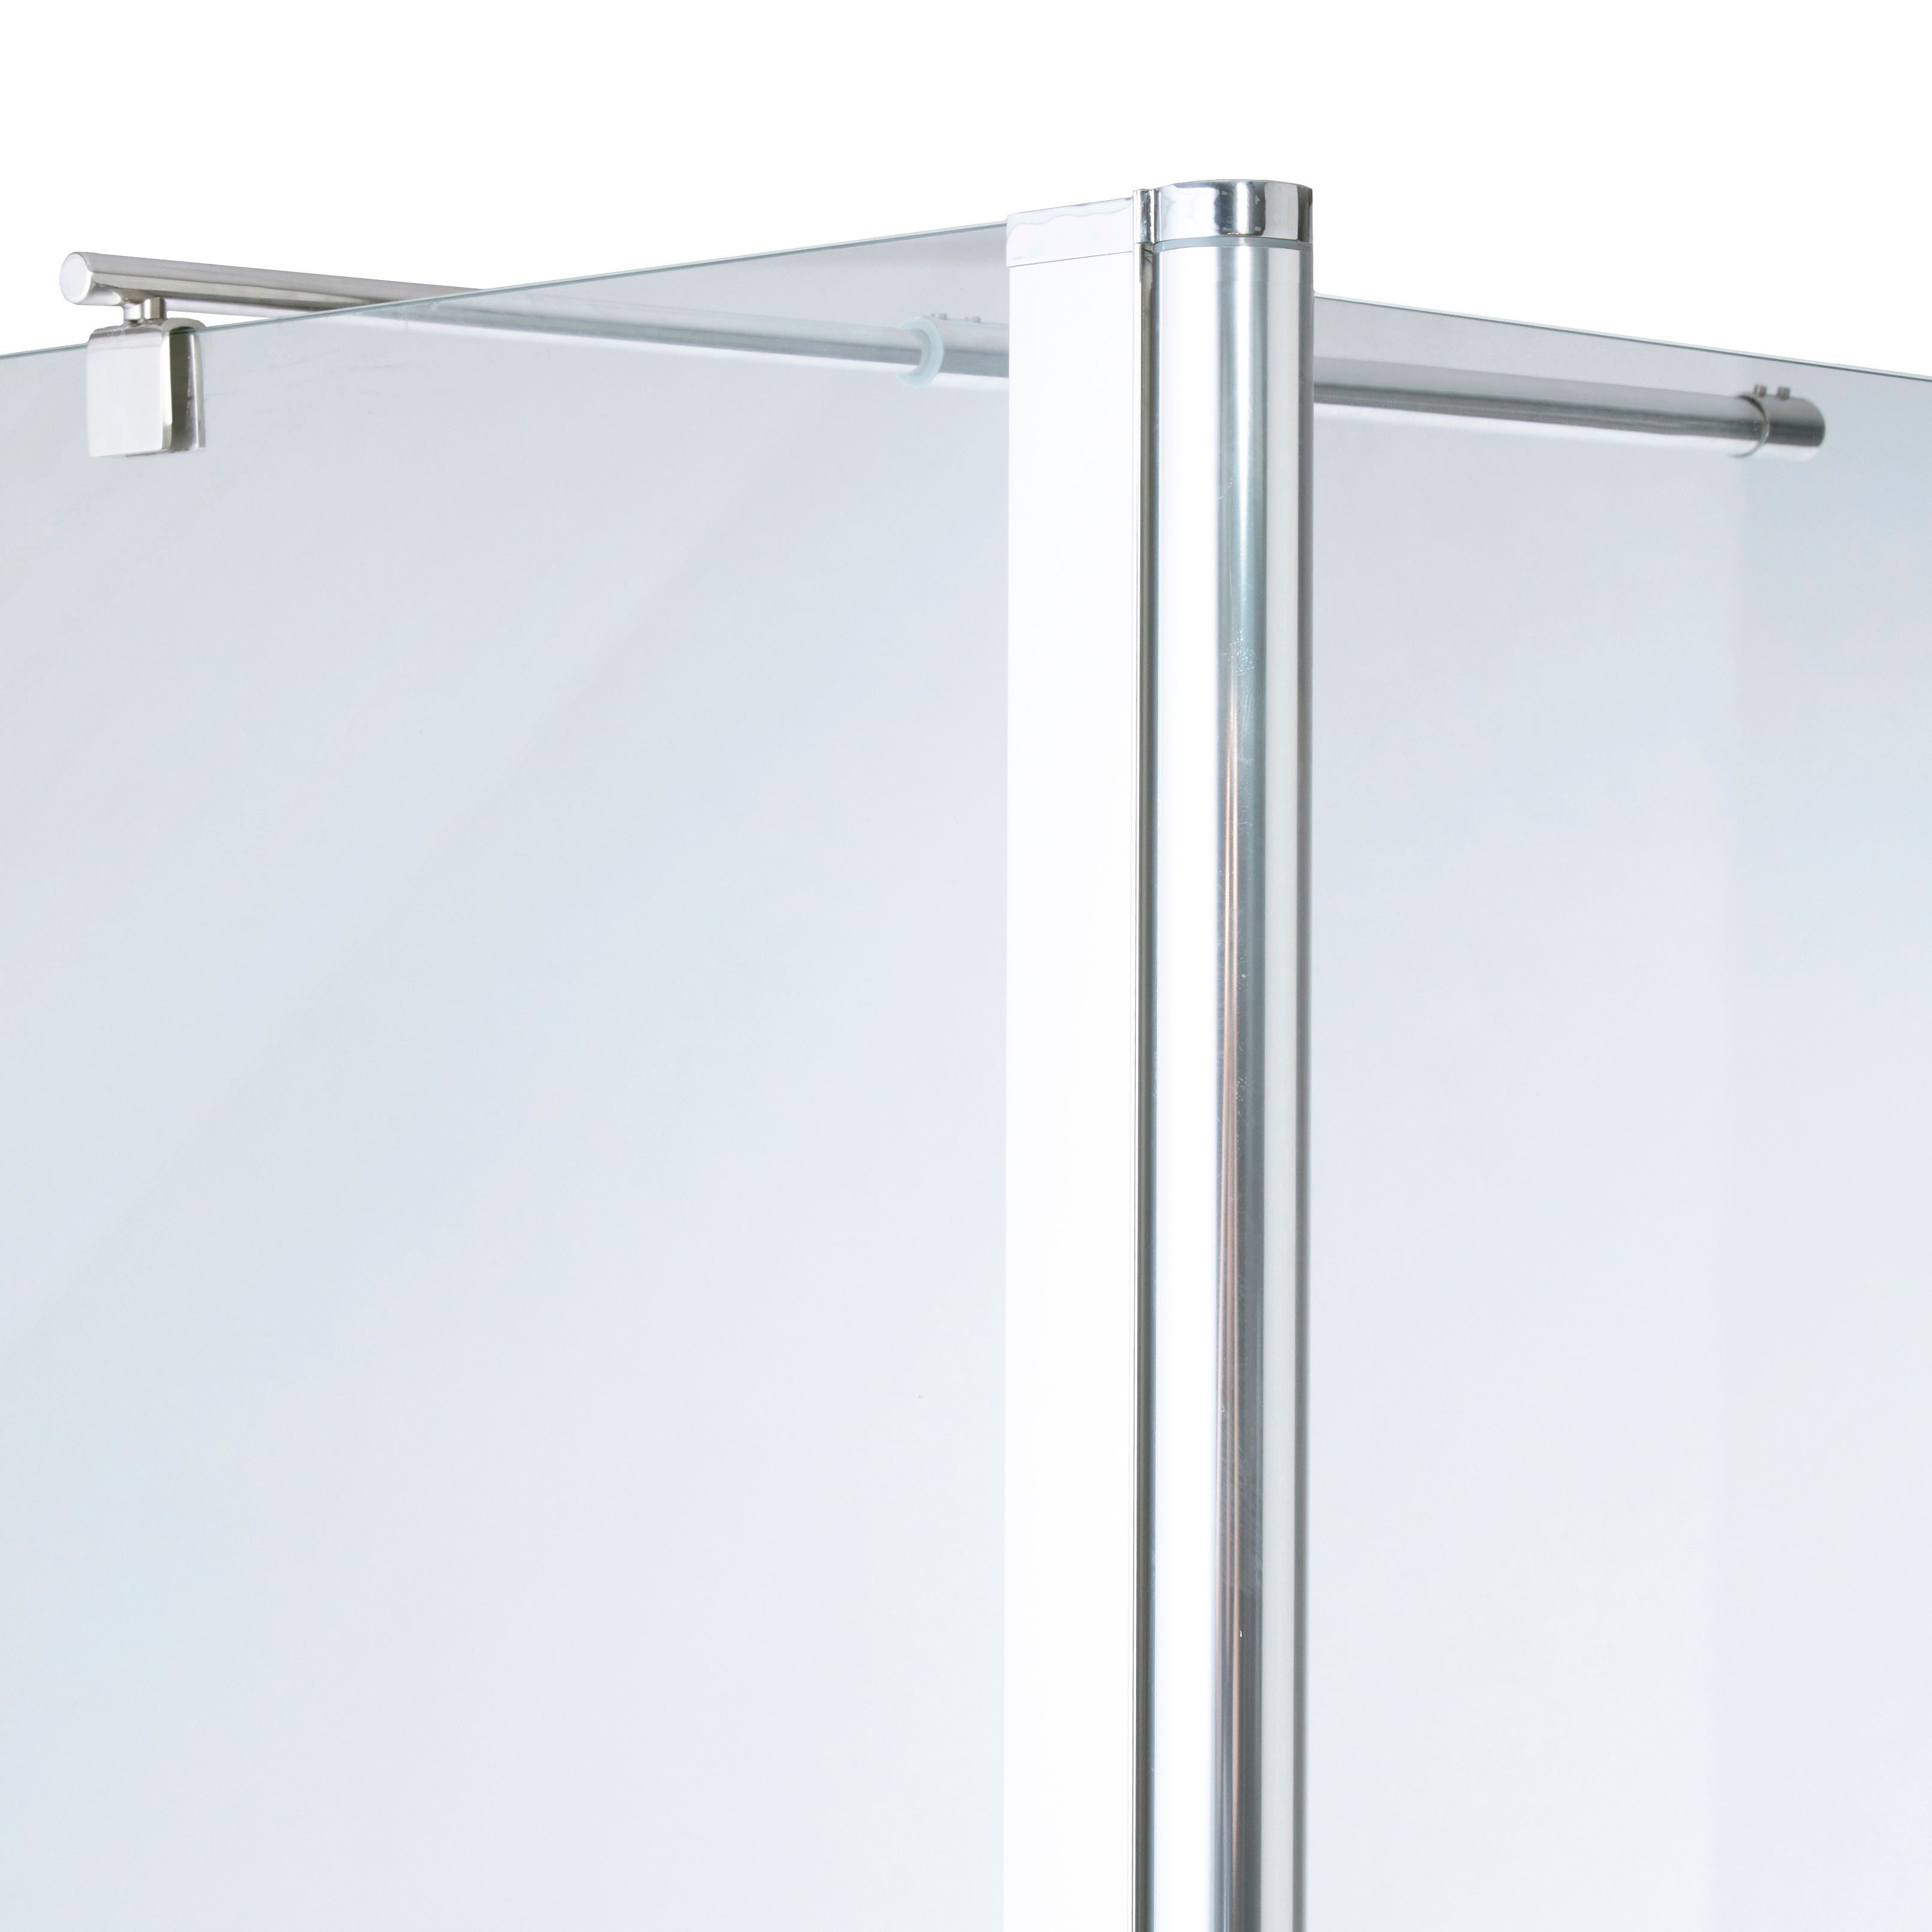 Cooke & Lewis Onega Chrome effect Frosted Walk-in Wet room glass screen & bar (H)195cm (W)80cm